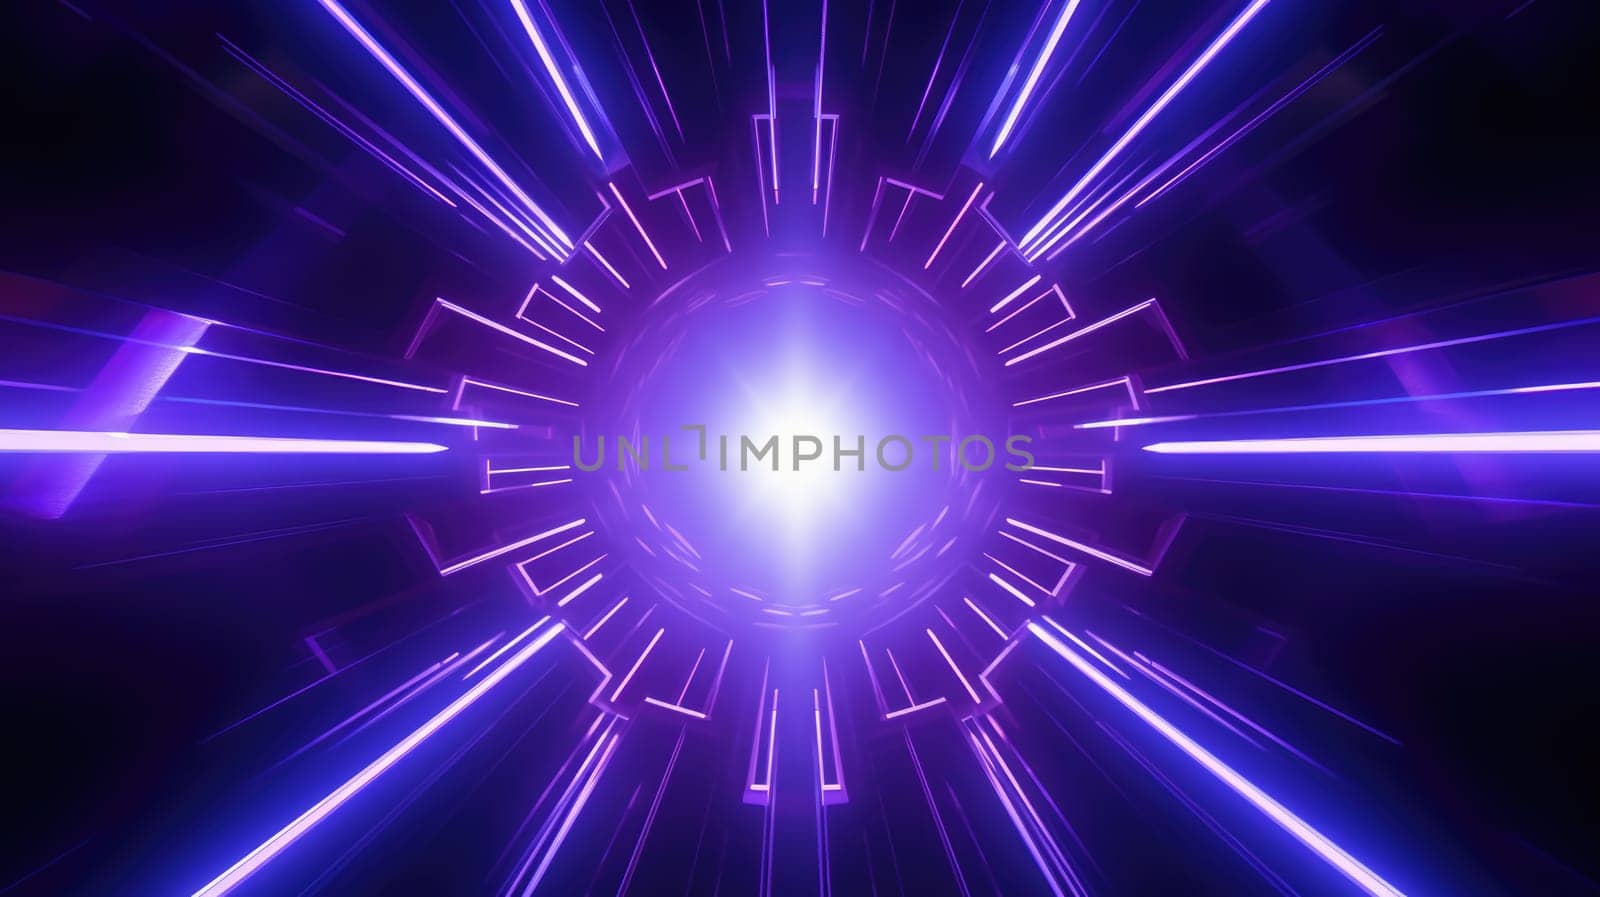 Abstract futuristic neon background, ultraviolet tunnel with rays by natali_brill